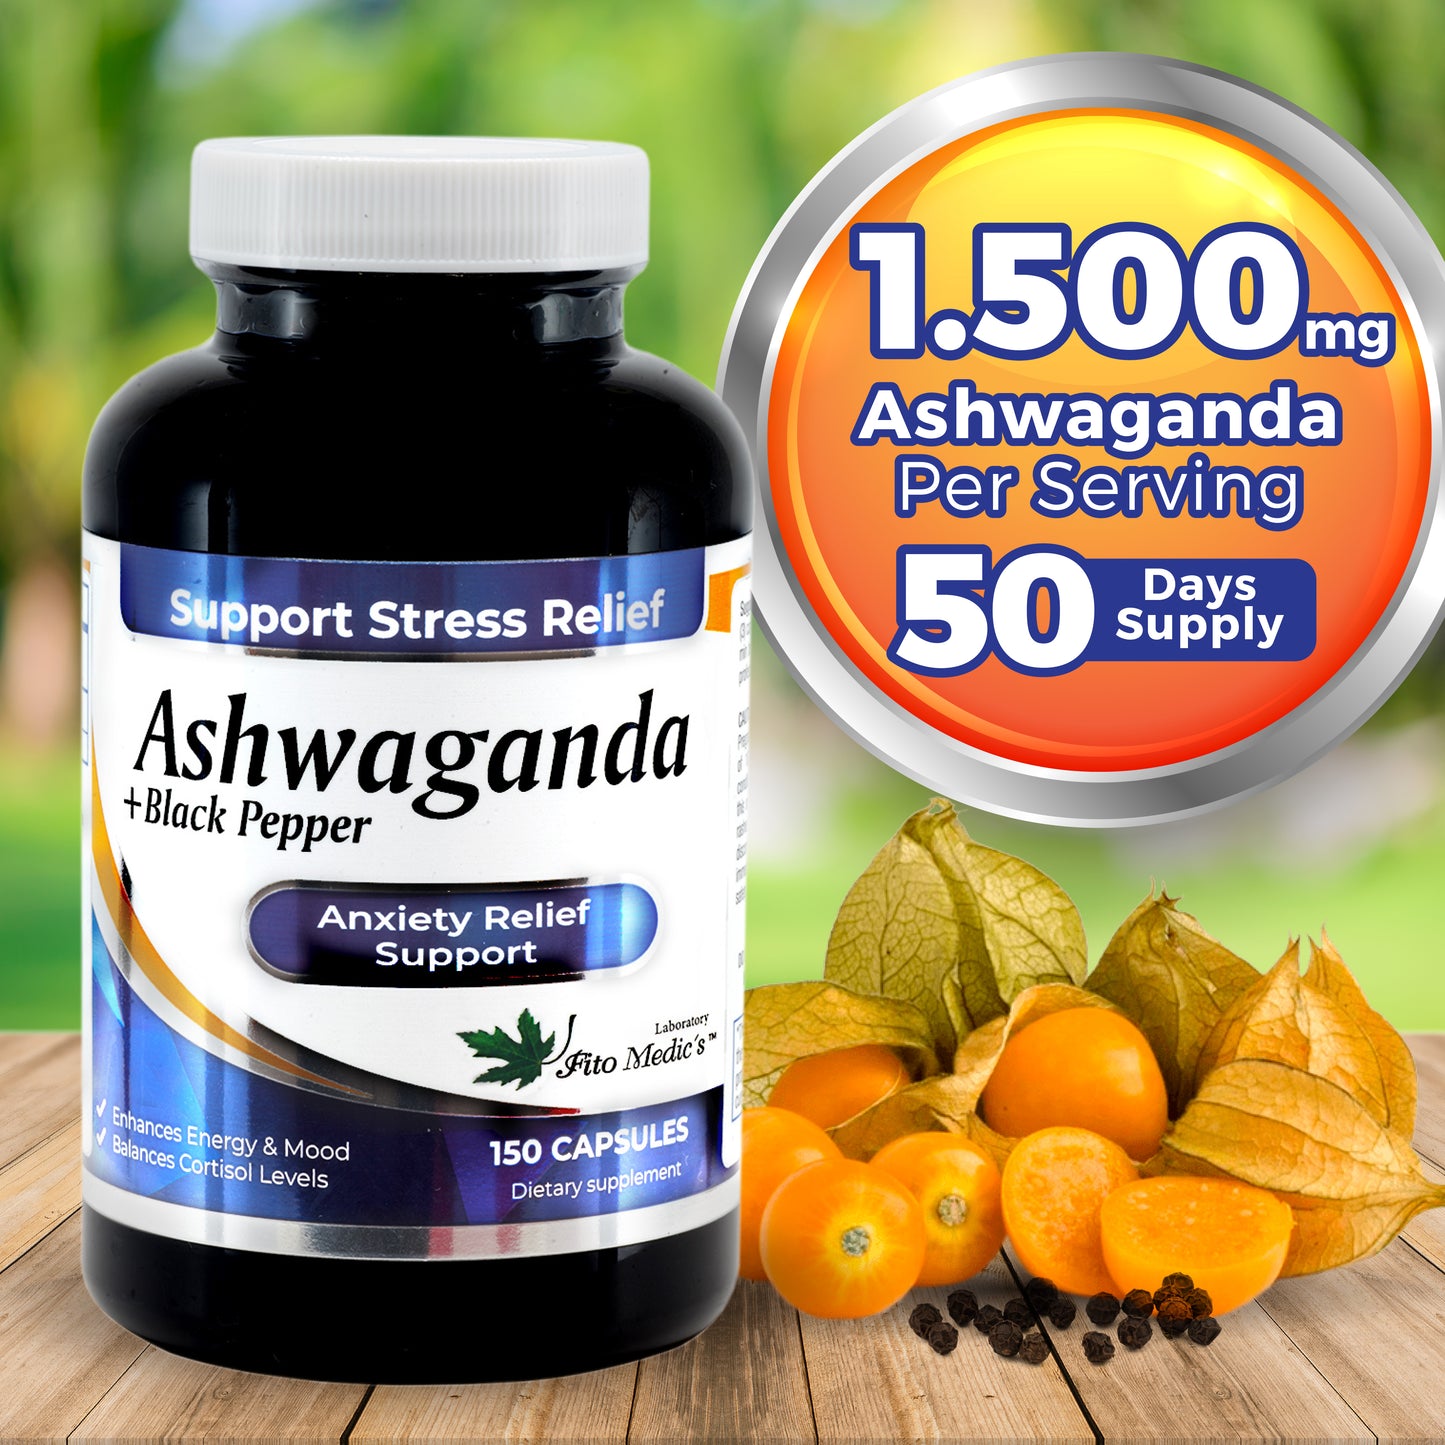 Ashwagandha Fito Medic´s - 150 Caps -Thyroid Support, Joints, Adaptogens- Helps Support a Healthy Response to Stress, The Immune System.